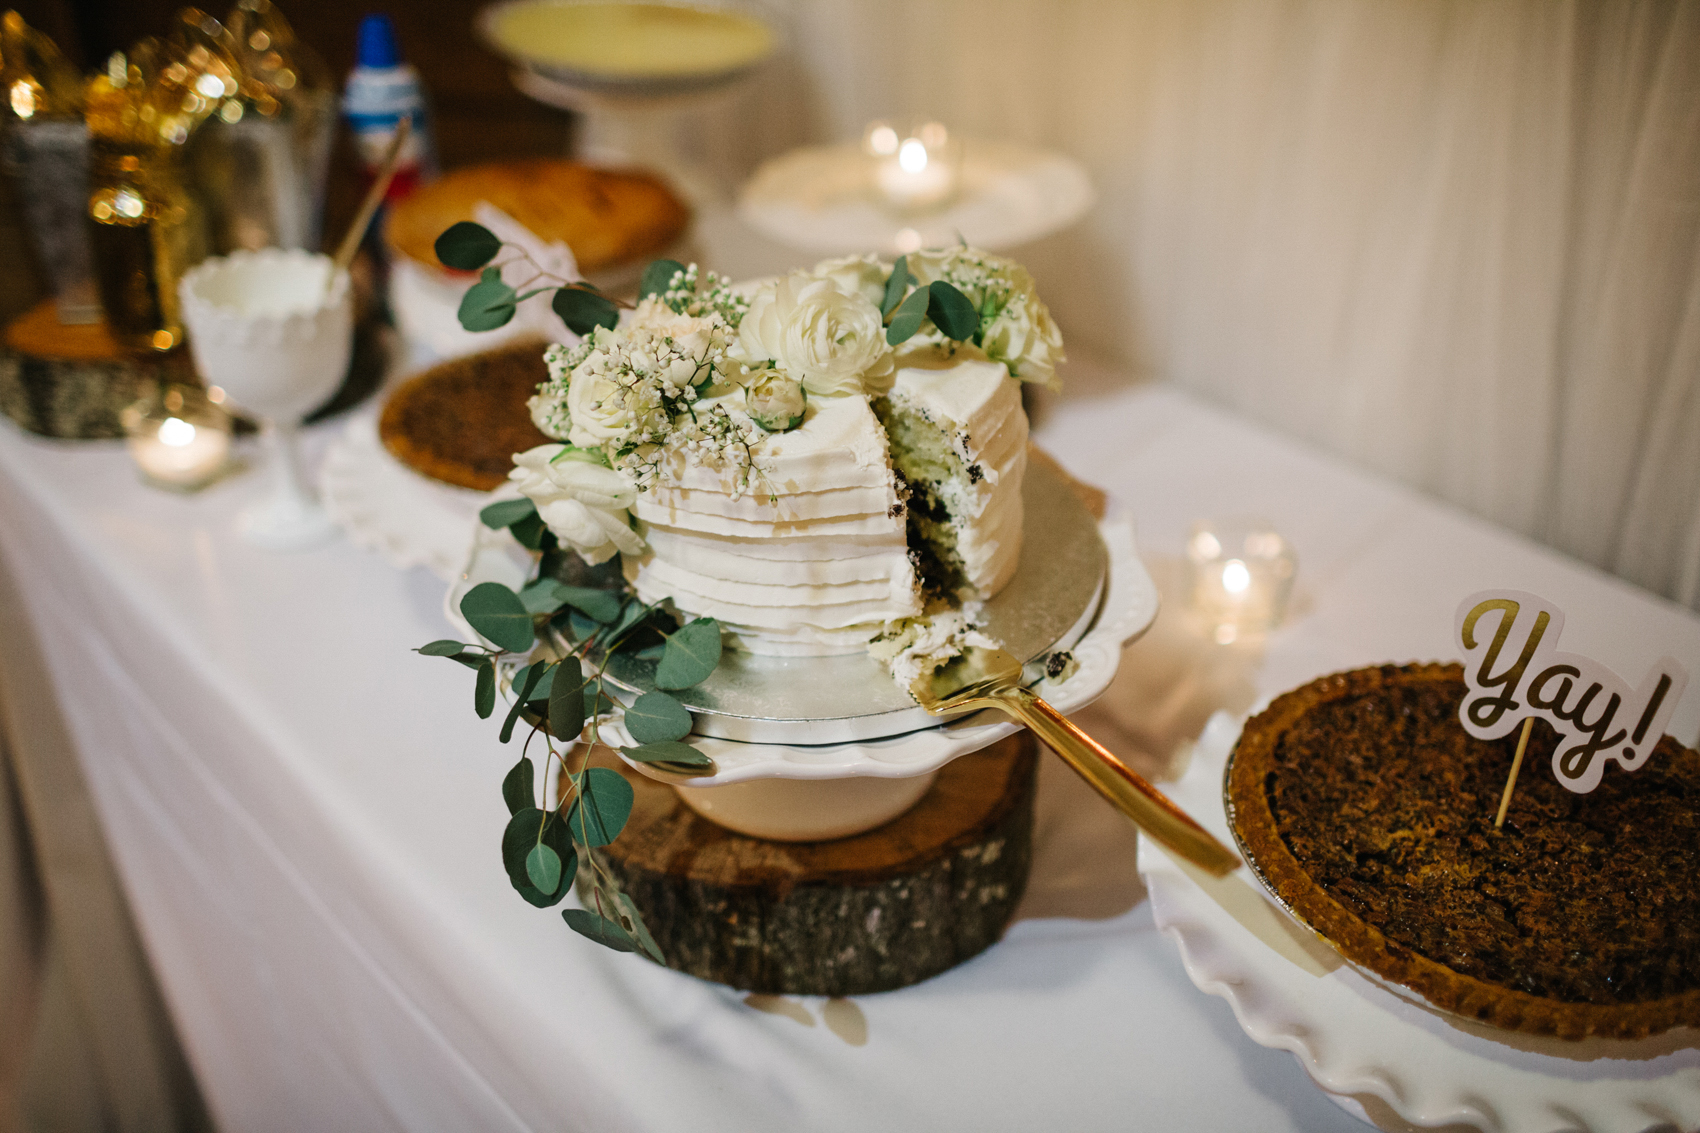 a simple buttercream wedding cake with fresh flowers and greenery with a tree stump cake stand